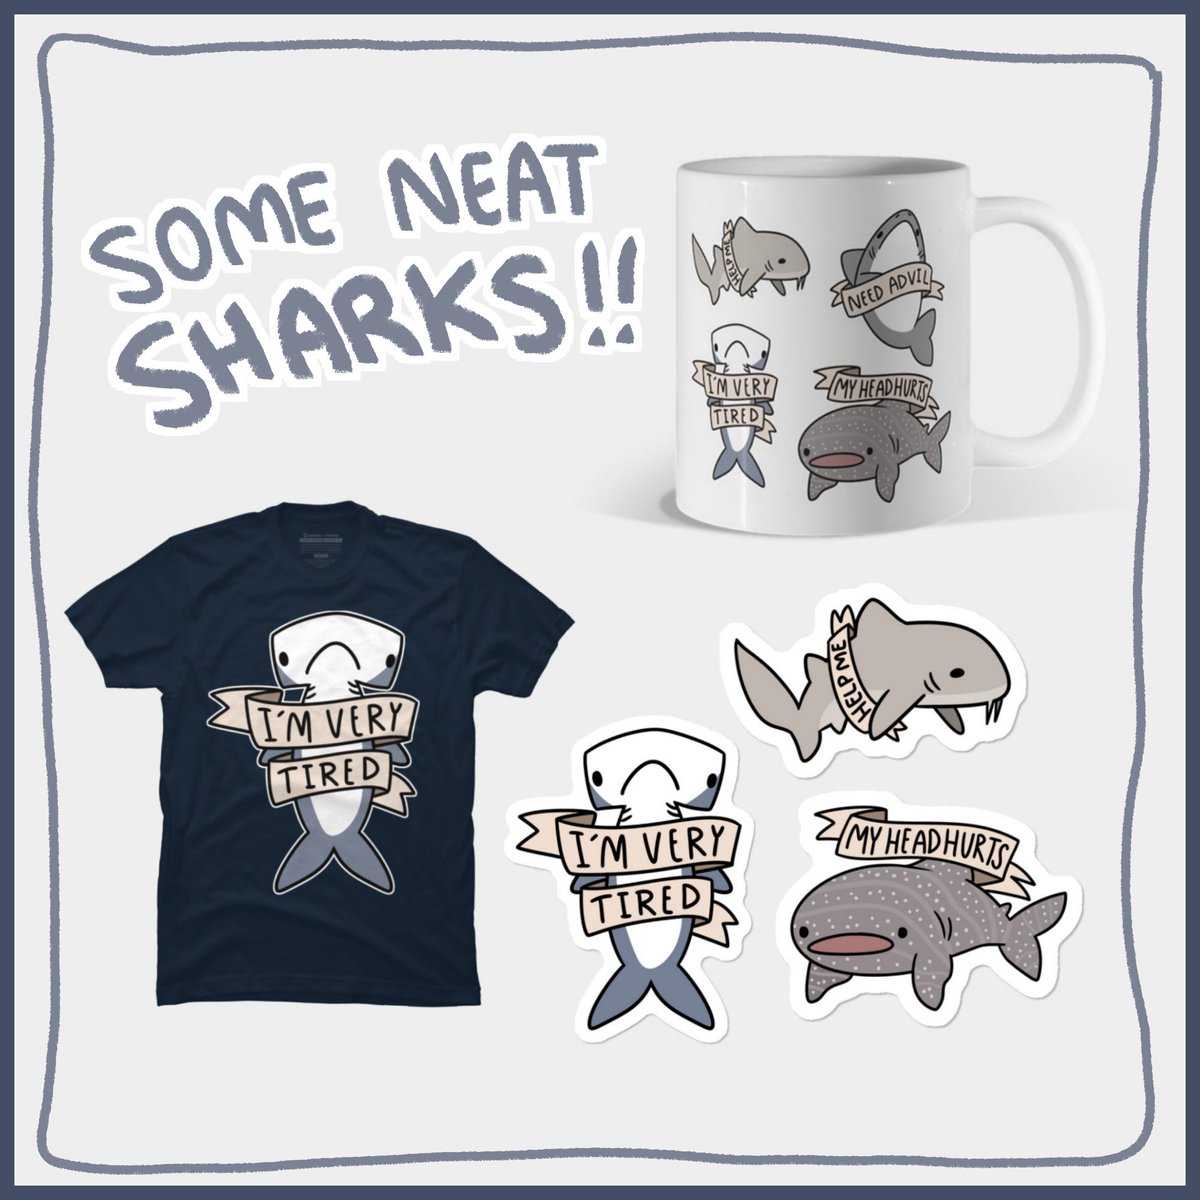 Hey guys! There's currently 30% off everything in my store with code: CYBERSALE ! Get cool designs like these and many more on mugs, stickers, prints, hoodies and more apparel! ✨

https://t.co/WC91ldqm52 